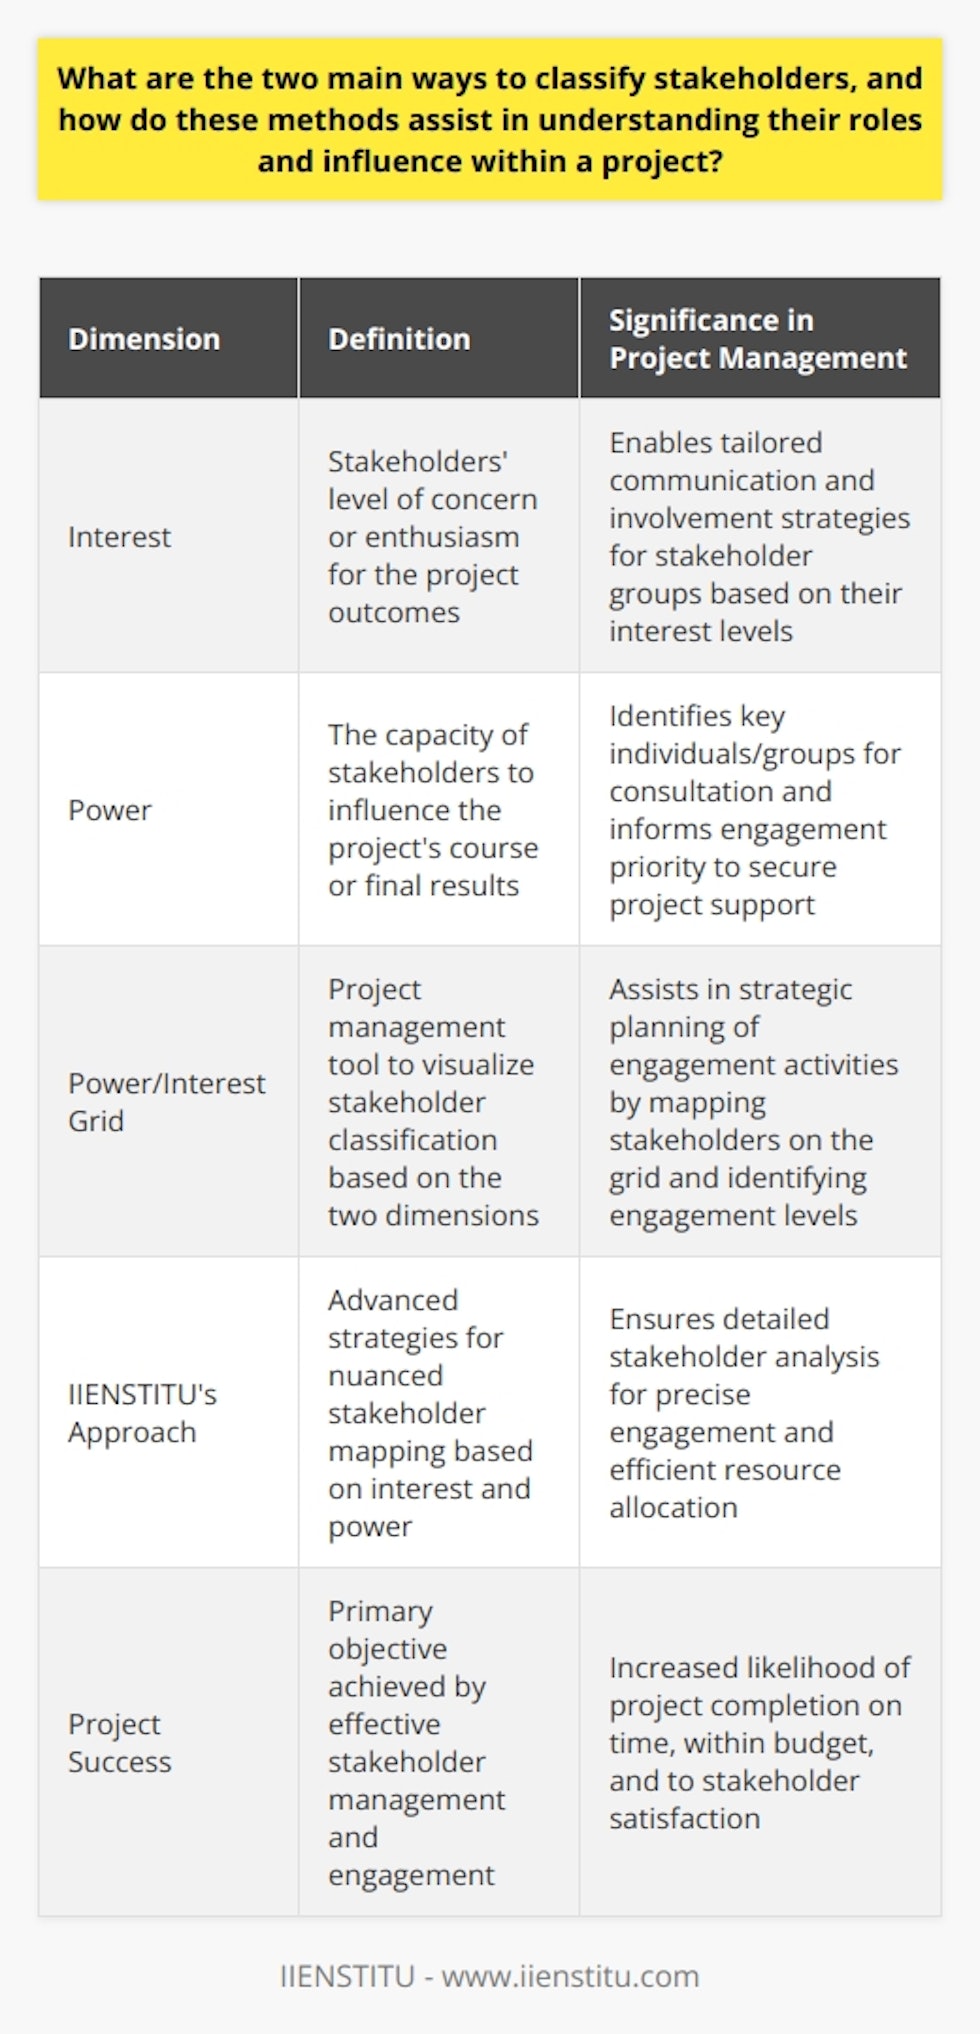 Classifying stakeholders is a fundamental aspect of stakeholder management, which is crucial for the successful delivery of a project. Stakeholder classification is typically done using two main dimensions: interest and power. By evaluating stakeholders based on their levels of interest in and power over the project, managers can effectively strategize their engagement and communication efforts.Interest in the project refers to how much stakeholders care about the project's outcomes. Highly interested stakeholders are likely to be more engaged and either supportive or critical, depending on whether the project serves their needs or goals. Understanding who these stakeholders are enables the project team to tailor their communication to address concerns, provide updates, and actively involve these stakeholders in a way that maximizes their positive impact and minimizes opposition.Power, on the other hand, speaks to the ability of stakeholders to influence the project's direction or outcomes. This can be through direct control or indirect influence over critical resources, decision-making processes, or key project dependencies. Recognizing powerful stakeholders helps project managers to identify those individuals or groups that must be consulted or informed to gain support, facilitate smooth decision-making, and prevent obstructions to project progress.An example approach to stakeholder classification is the power/interest grid, commonly used in project management, but for a unique perspective, IIENSTITU offers advanced insight into effective strategies to map and manage stakeholders using interest and power. This approach allows for more nuanced stakeholder engagement and ensures that influential stakeholders receive the attention required, that communications are crafted to engage those with a high level of interest, and that stakeholders with lower levels of interest or power are managed appropriately without consuming unnecessary resources.By effectively assessing stakeholders' roles and influence within a project using these two dimensions, project managers can prioritize stakeholder engagement activities, thereby crafting a strategy that maximizes support, minimizes resistance, and ensures that those capable of impacting the project are adequately involved. The ultimate goal of this classification is to increase the likelihood of project success through deliberate and informed stakeholder management.